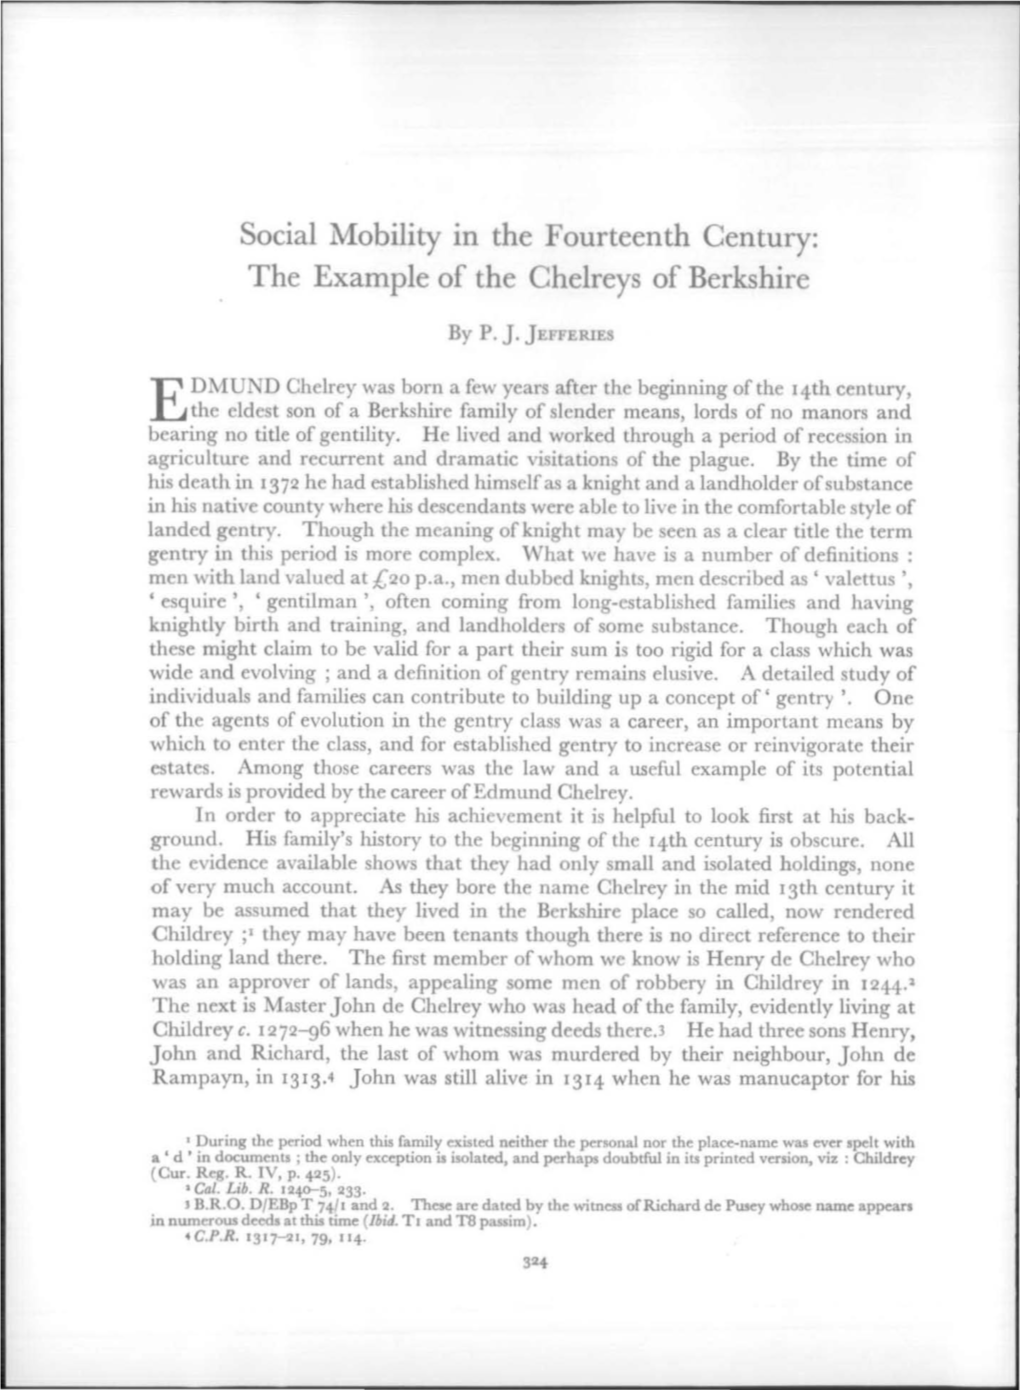 Social Mobility in the Fourteenth Century: the Example of the Chelreys of Berkshire